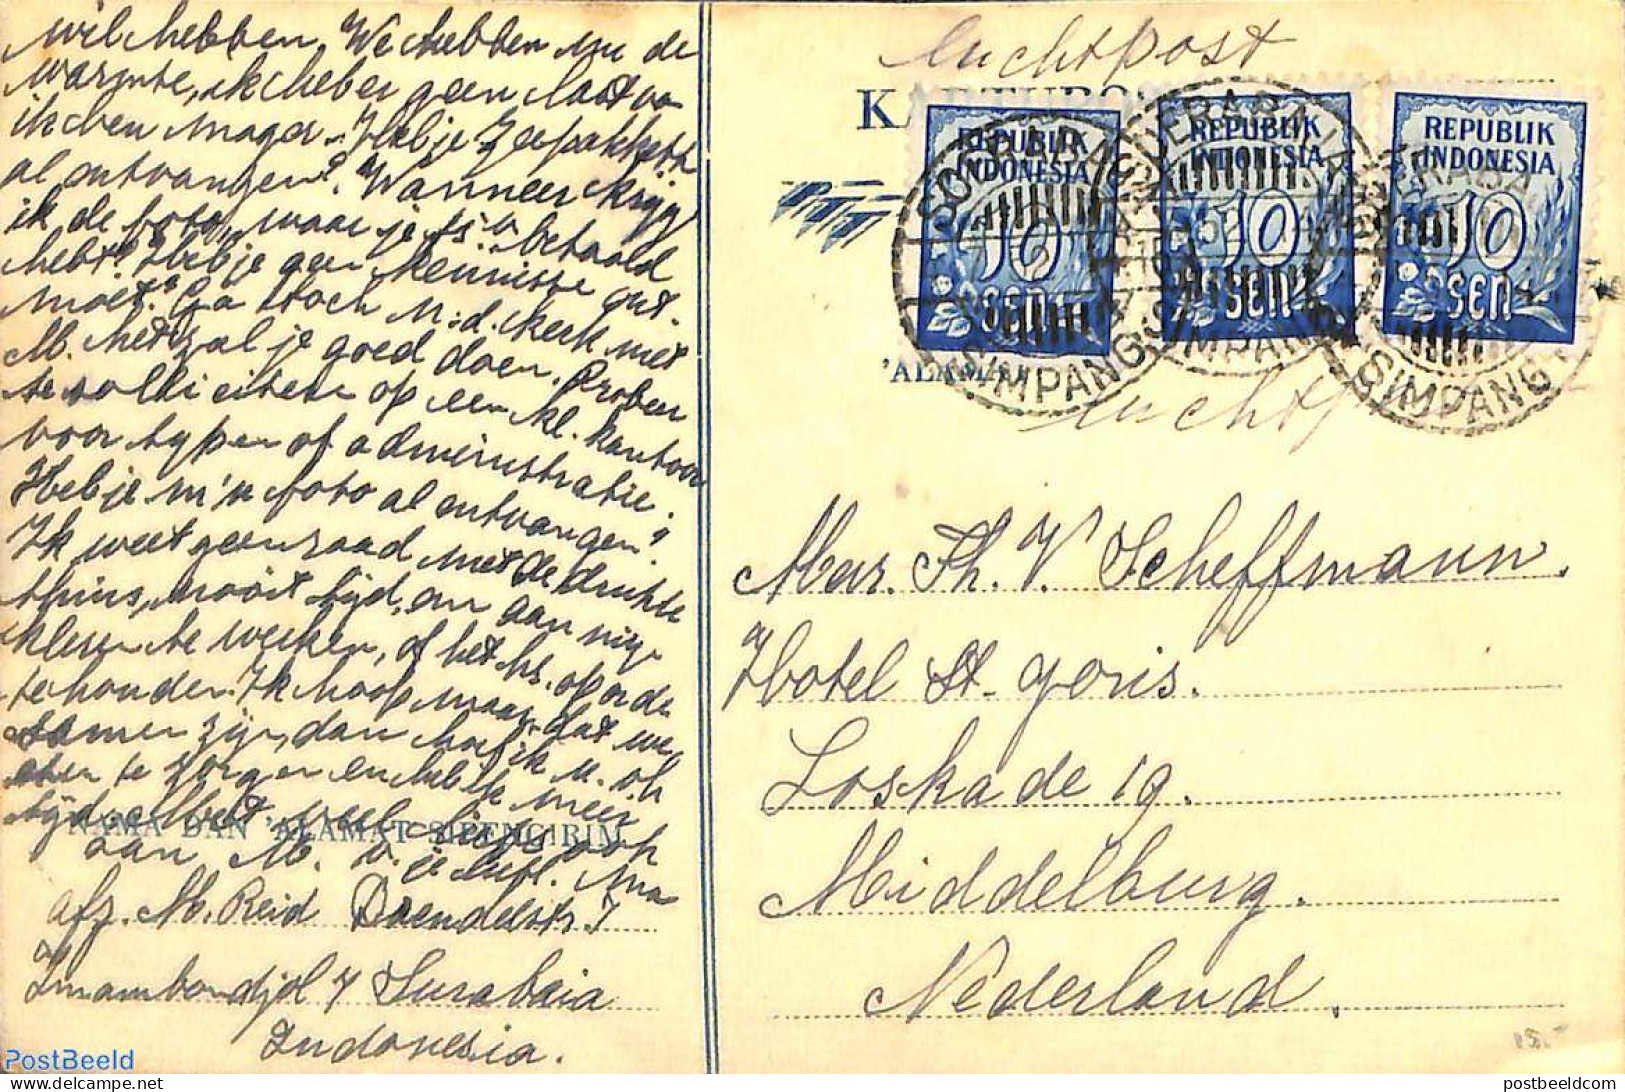 Indonesia 1952 Airmail Postcard To Holland, Postal History - Indonesia